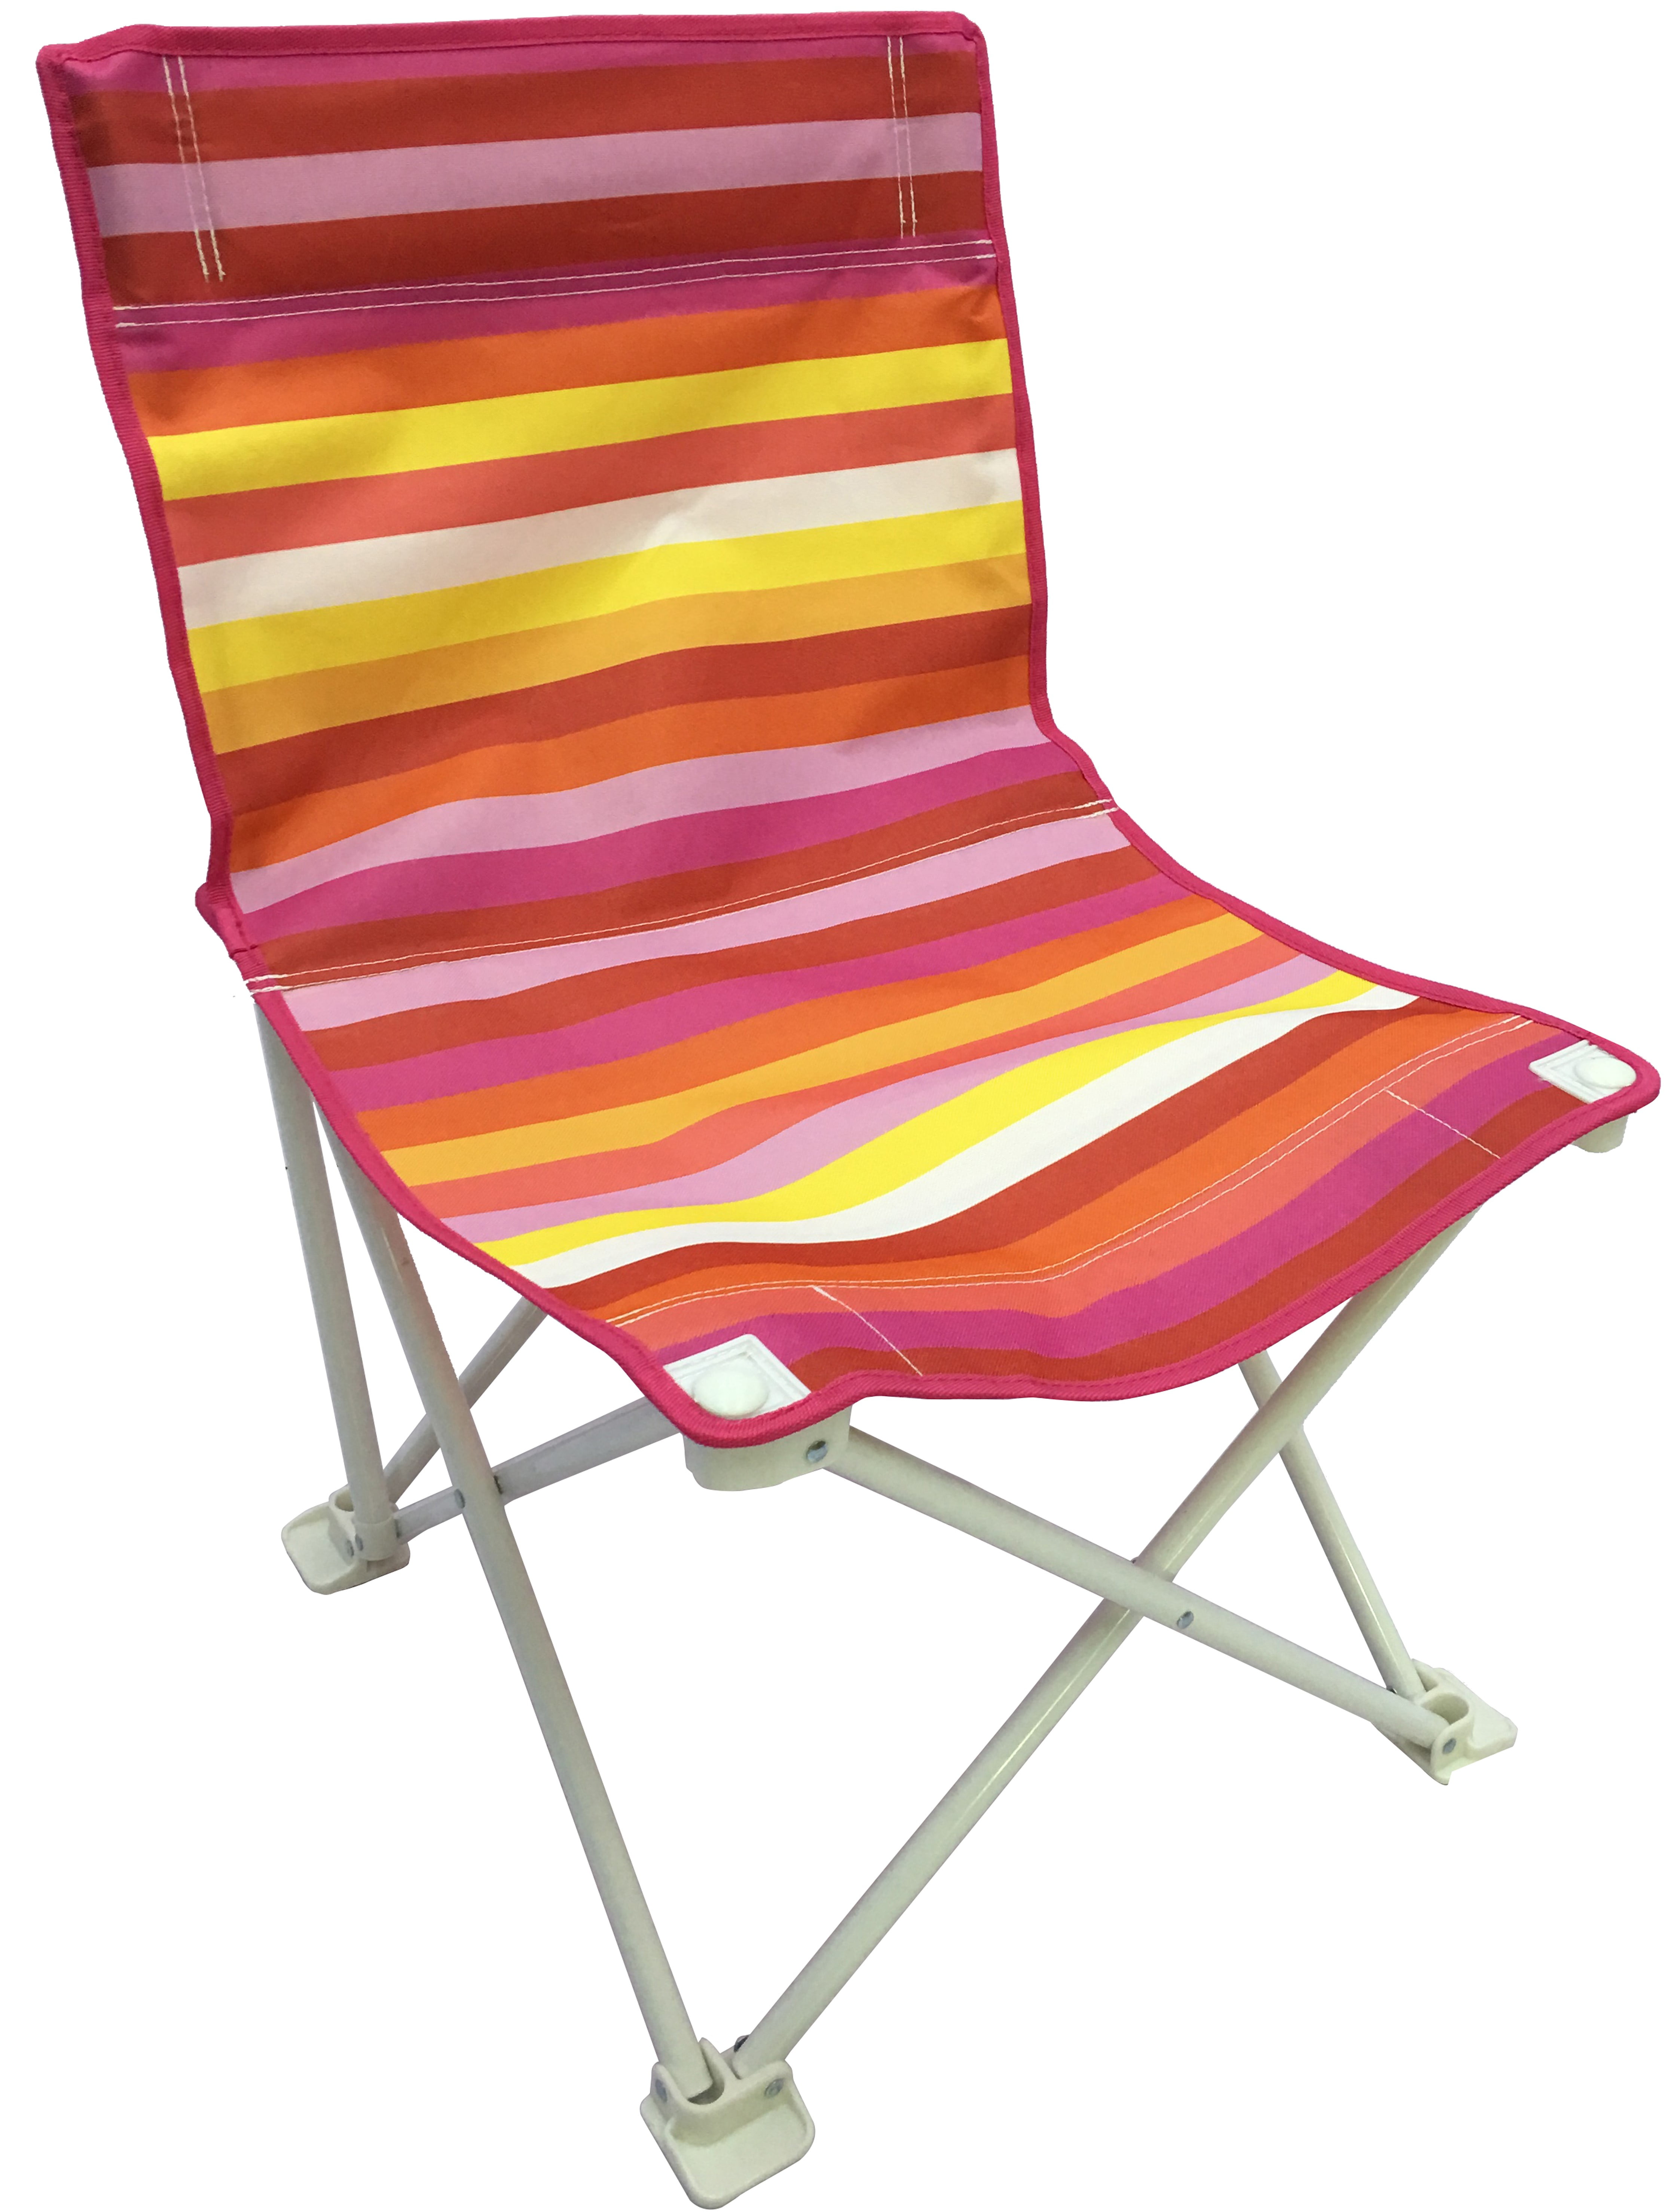 Unique Mainstays Folding Beach Chair with Simple Decor